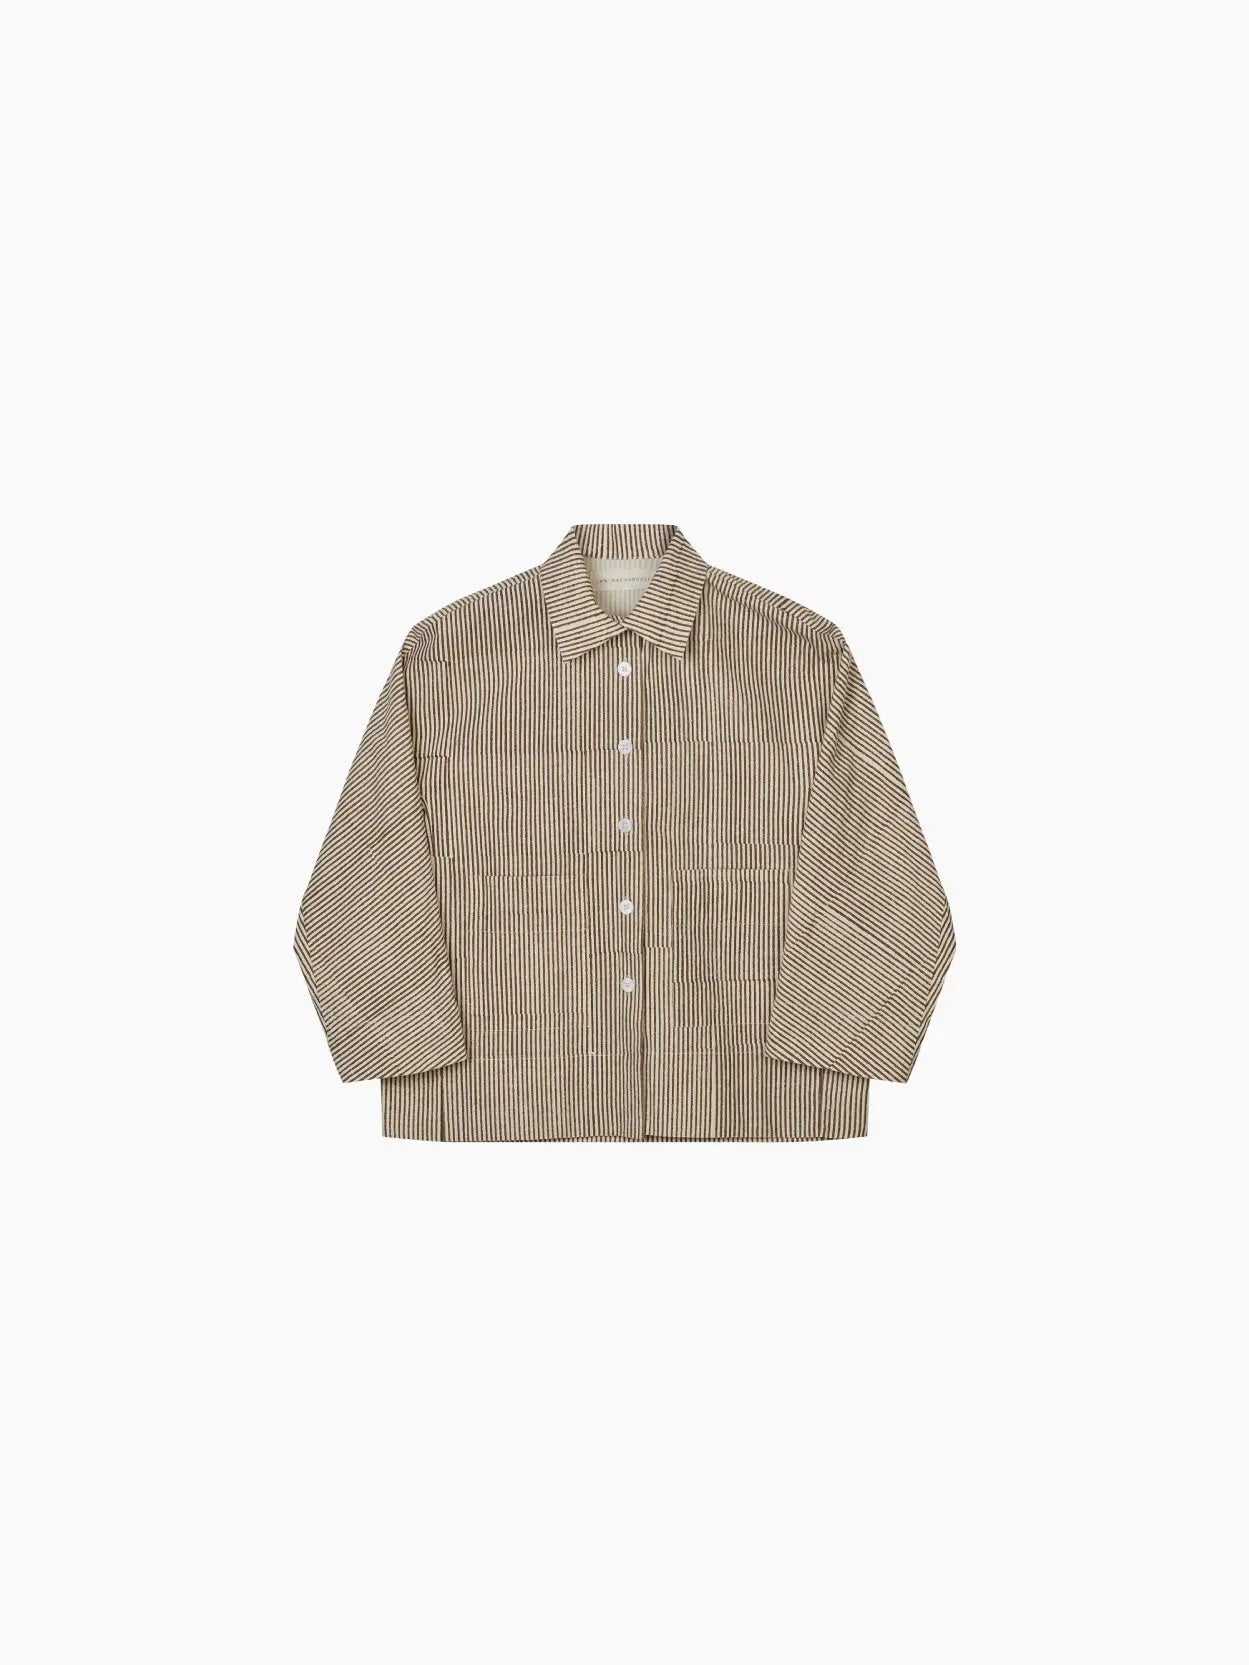 A beige and white striped button-up shirt with long sleeves is laid flat against a white background. The Thyme Shirt Block Print Stripe by Jan Machenhauer, available at Bassalstore in Barcelona, features a classic collar and five white buttons down the front.